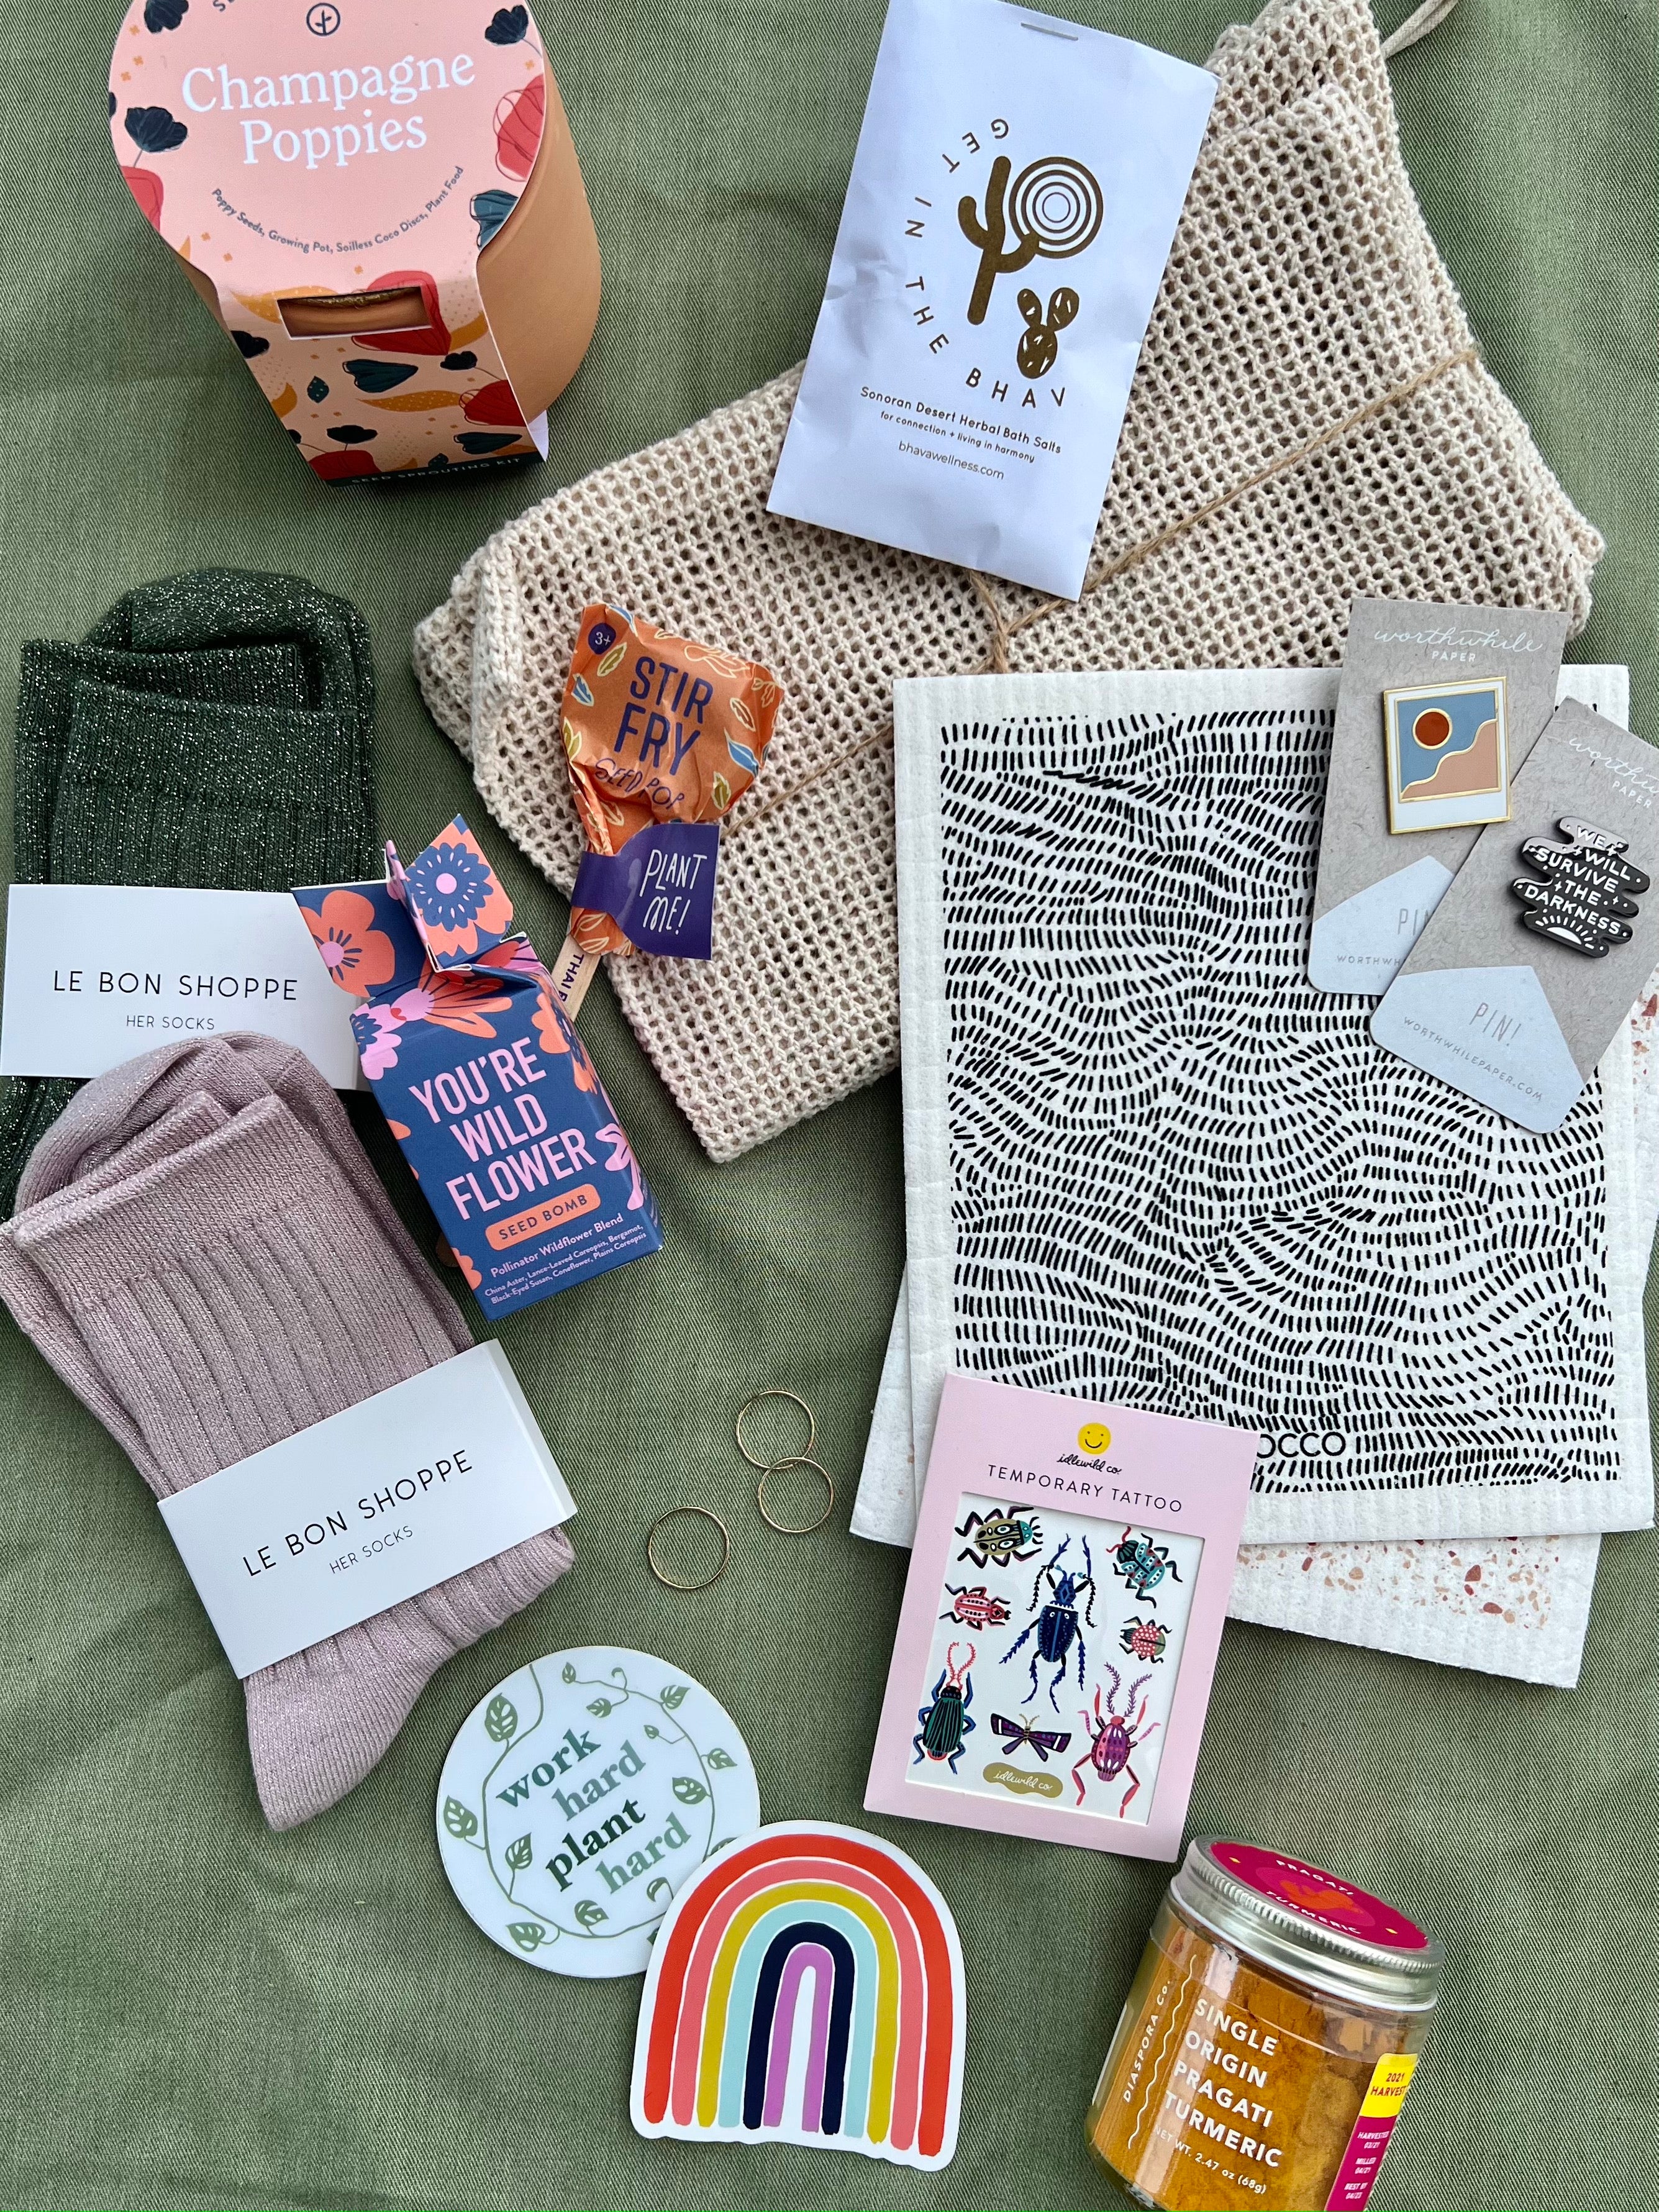 Stocking Stuffers and Small Gifts | Thread Spun Gift Guide 2022